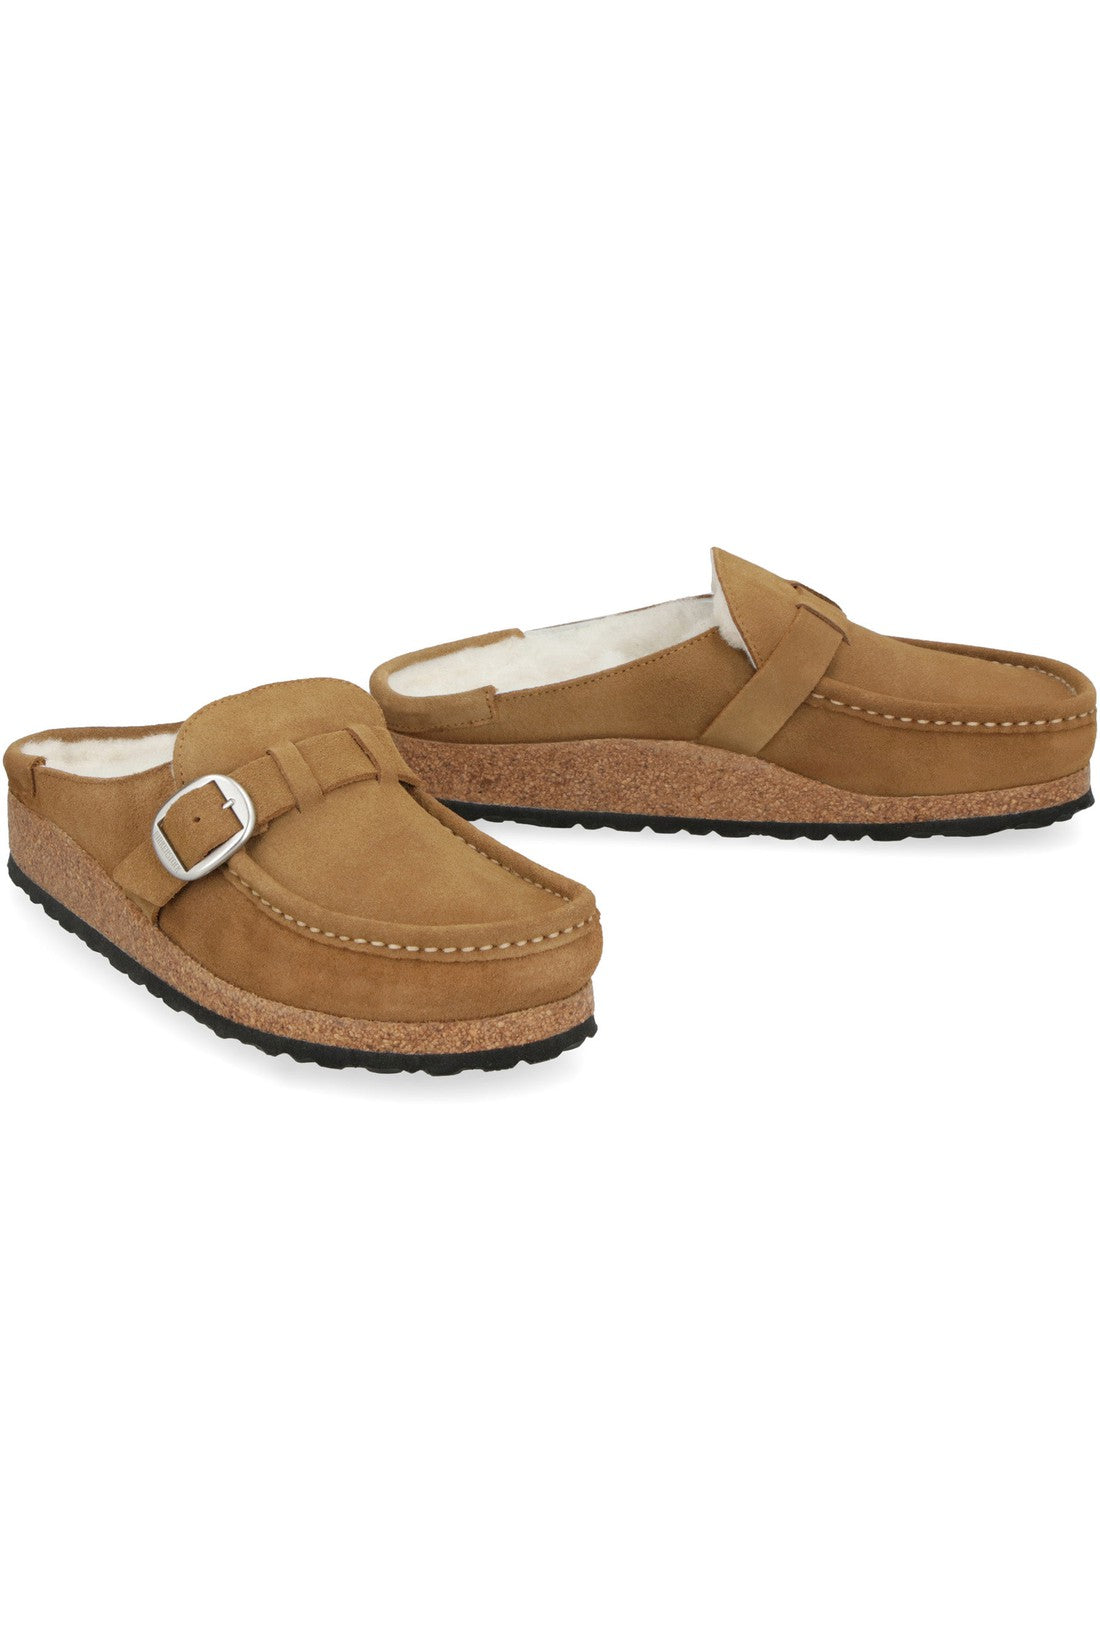 Birkenstock-OUTLET-SALE-Buckley Shearling suede and fur slippers-ARCHIVIST